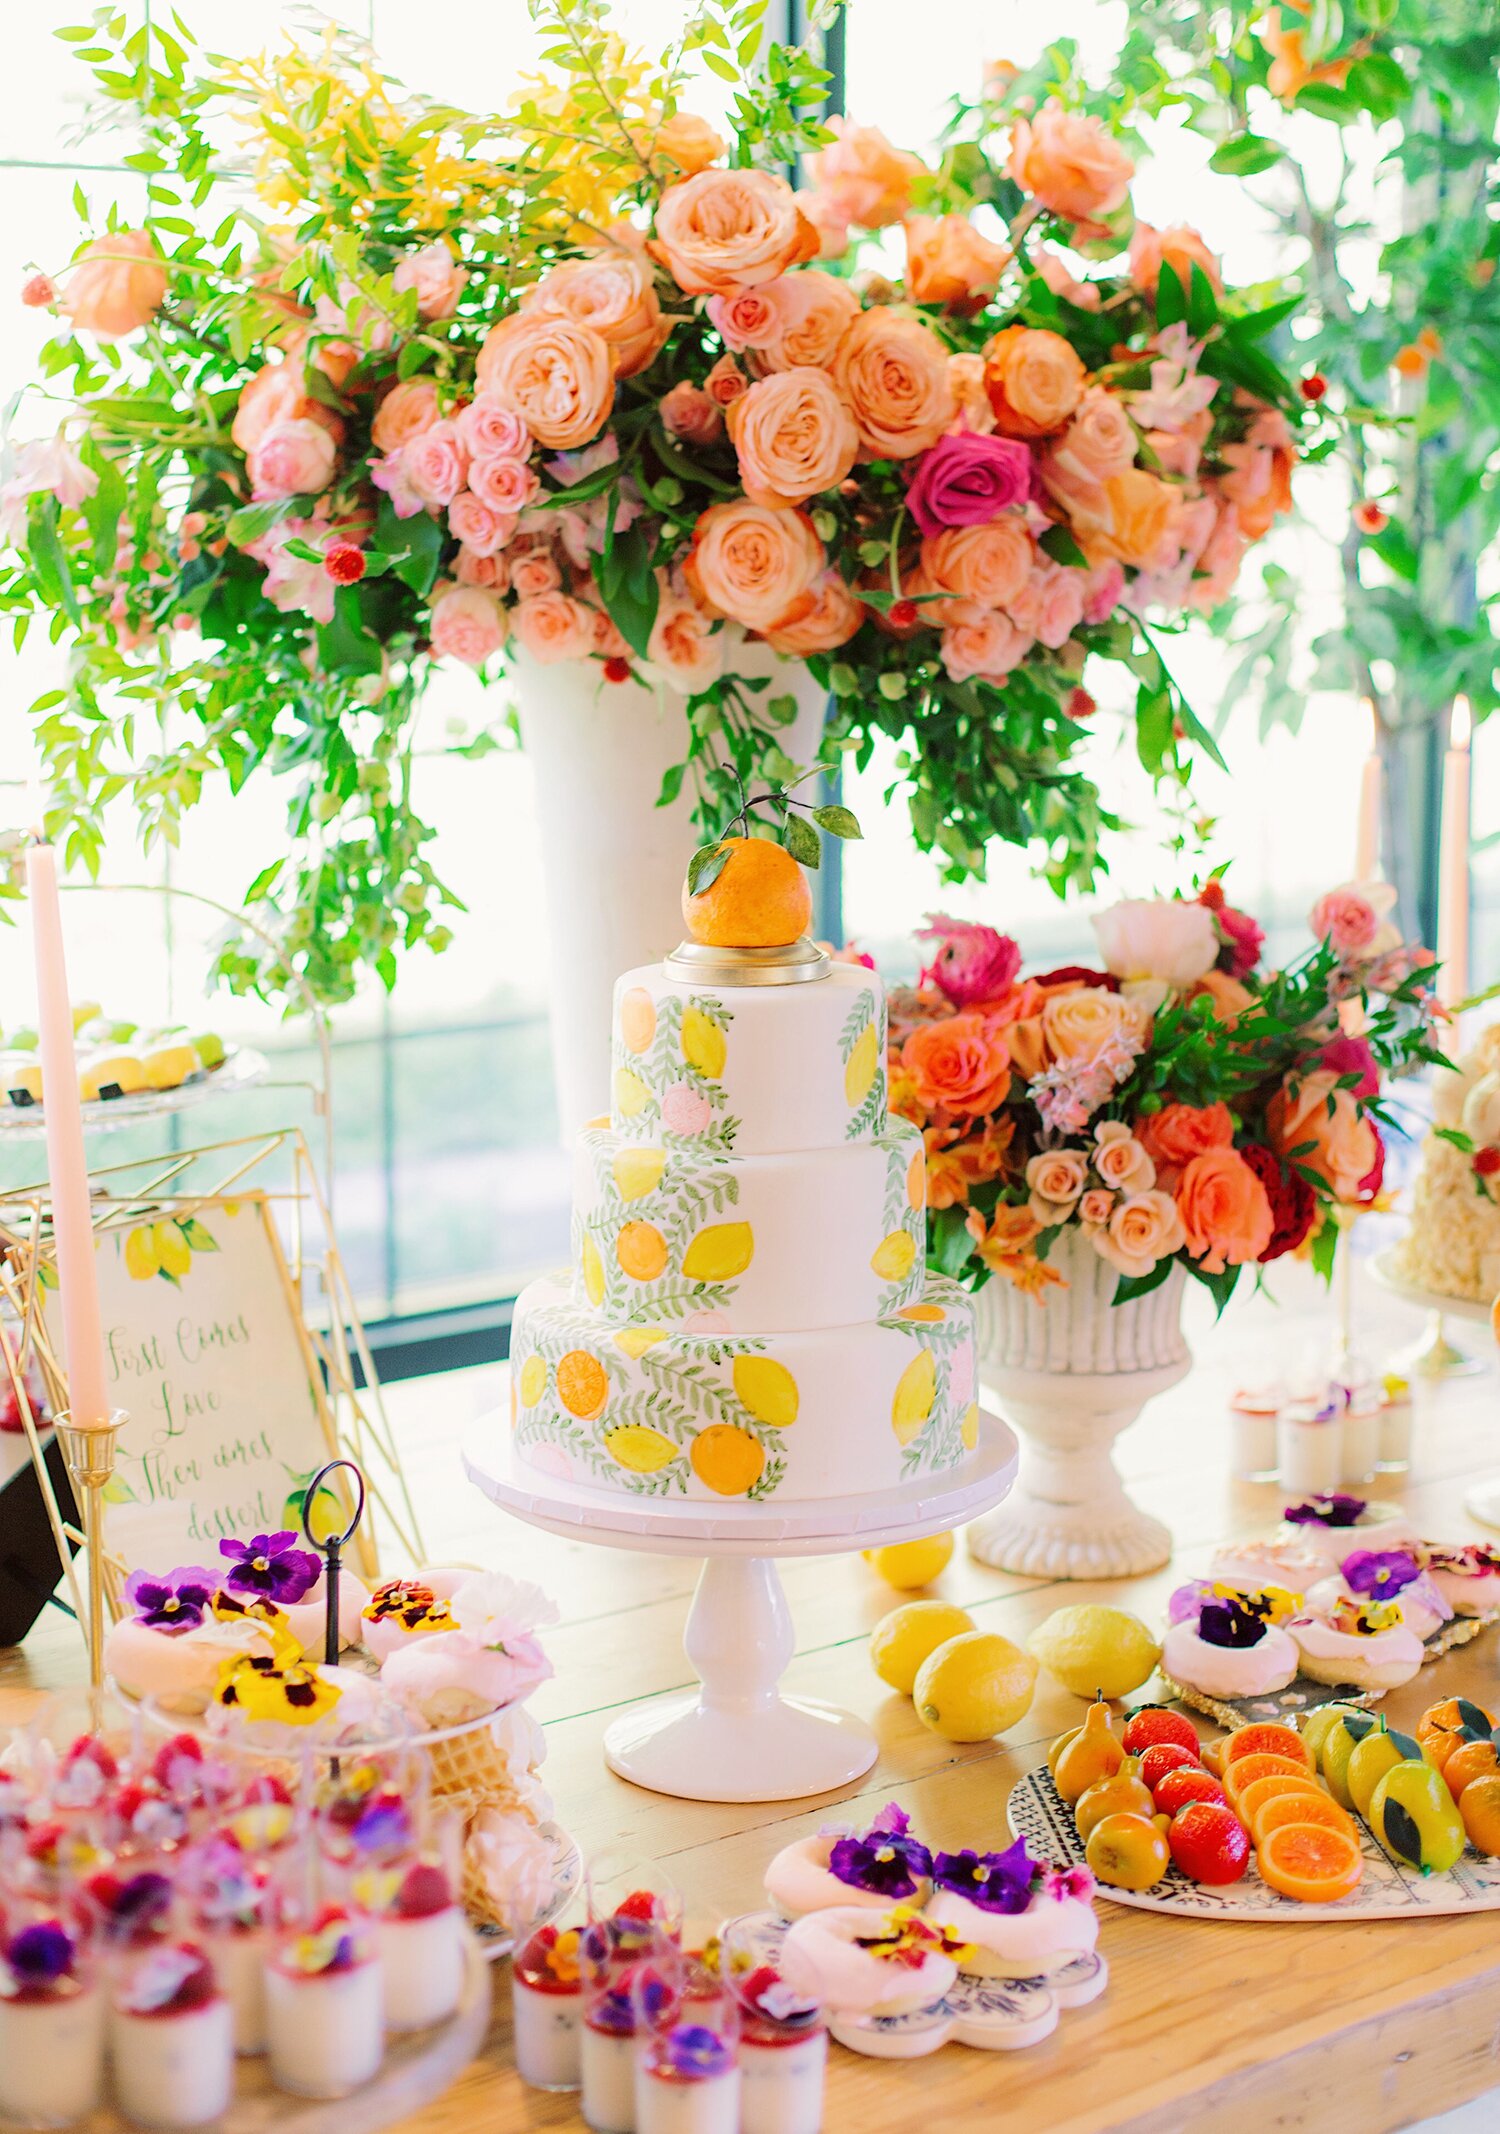 neon cake and flowers on table